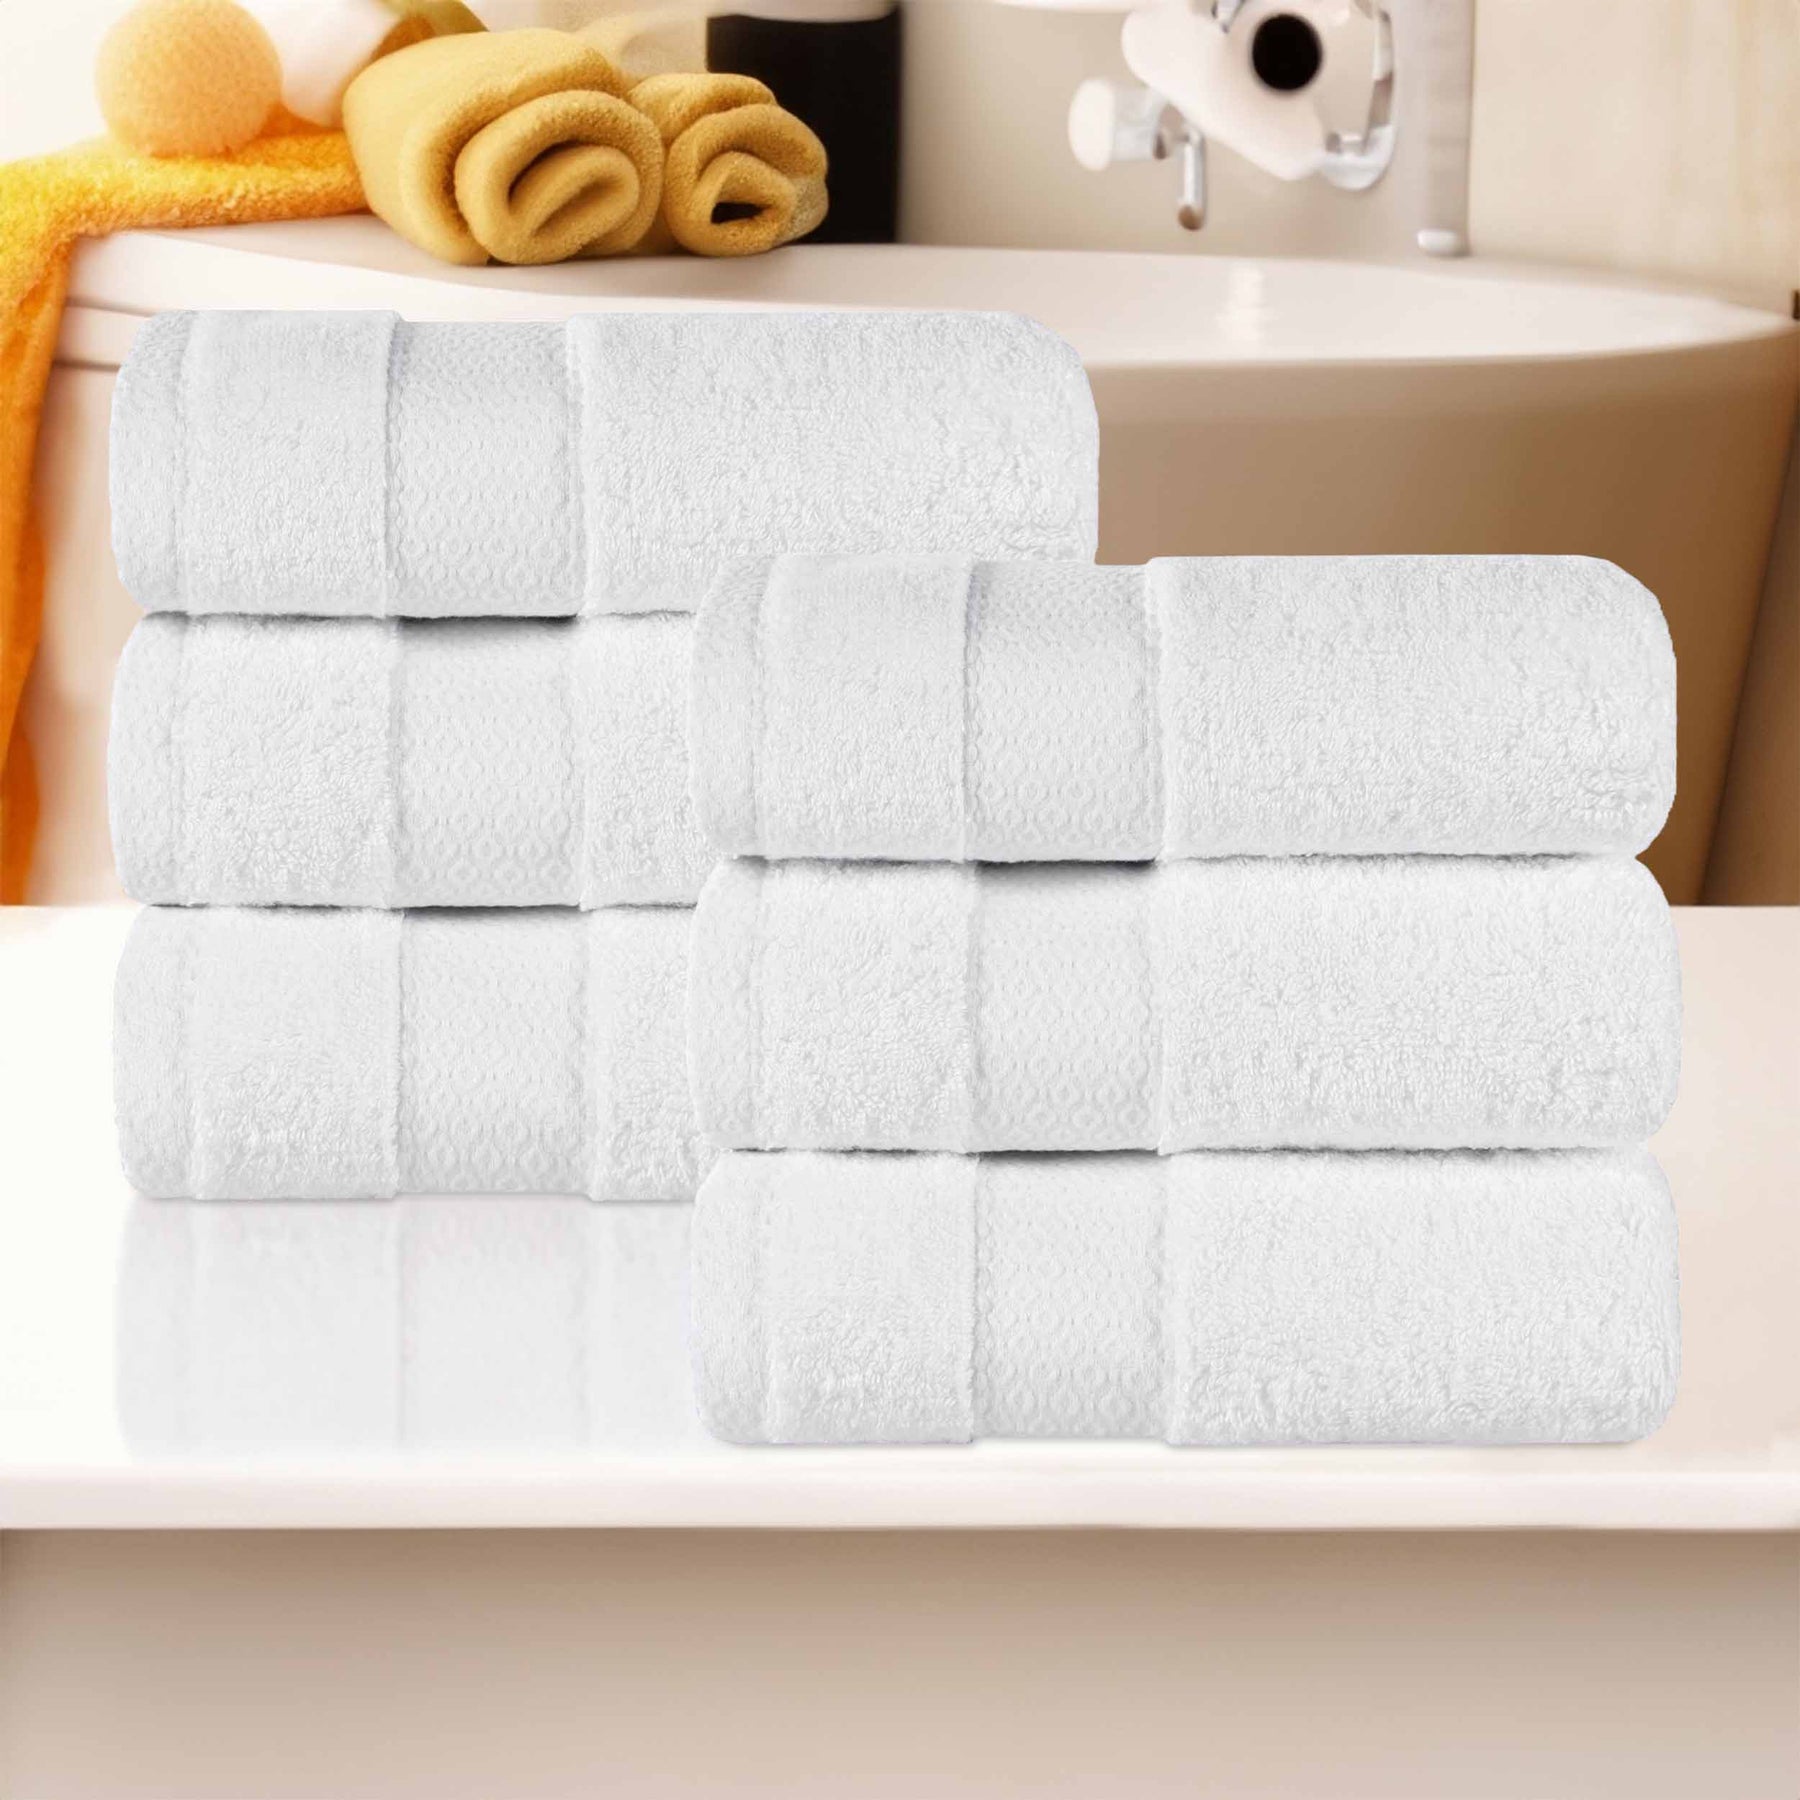 Superior Niles Egyptian Giza Cotton Dobby Ultra-Plush Absorbent Hand Towel Set of 6 - Gold